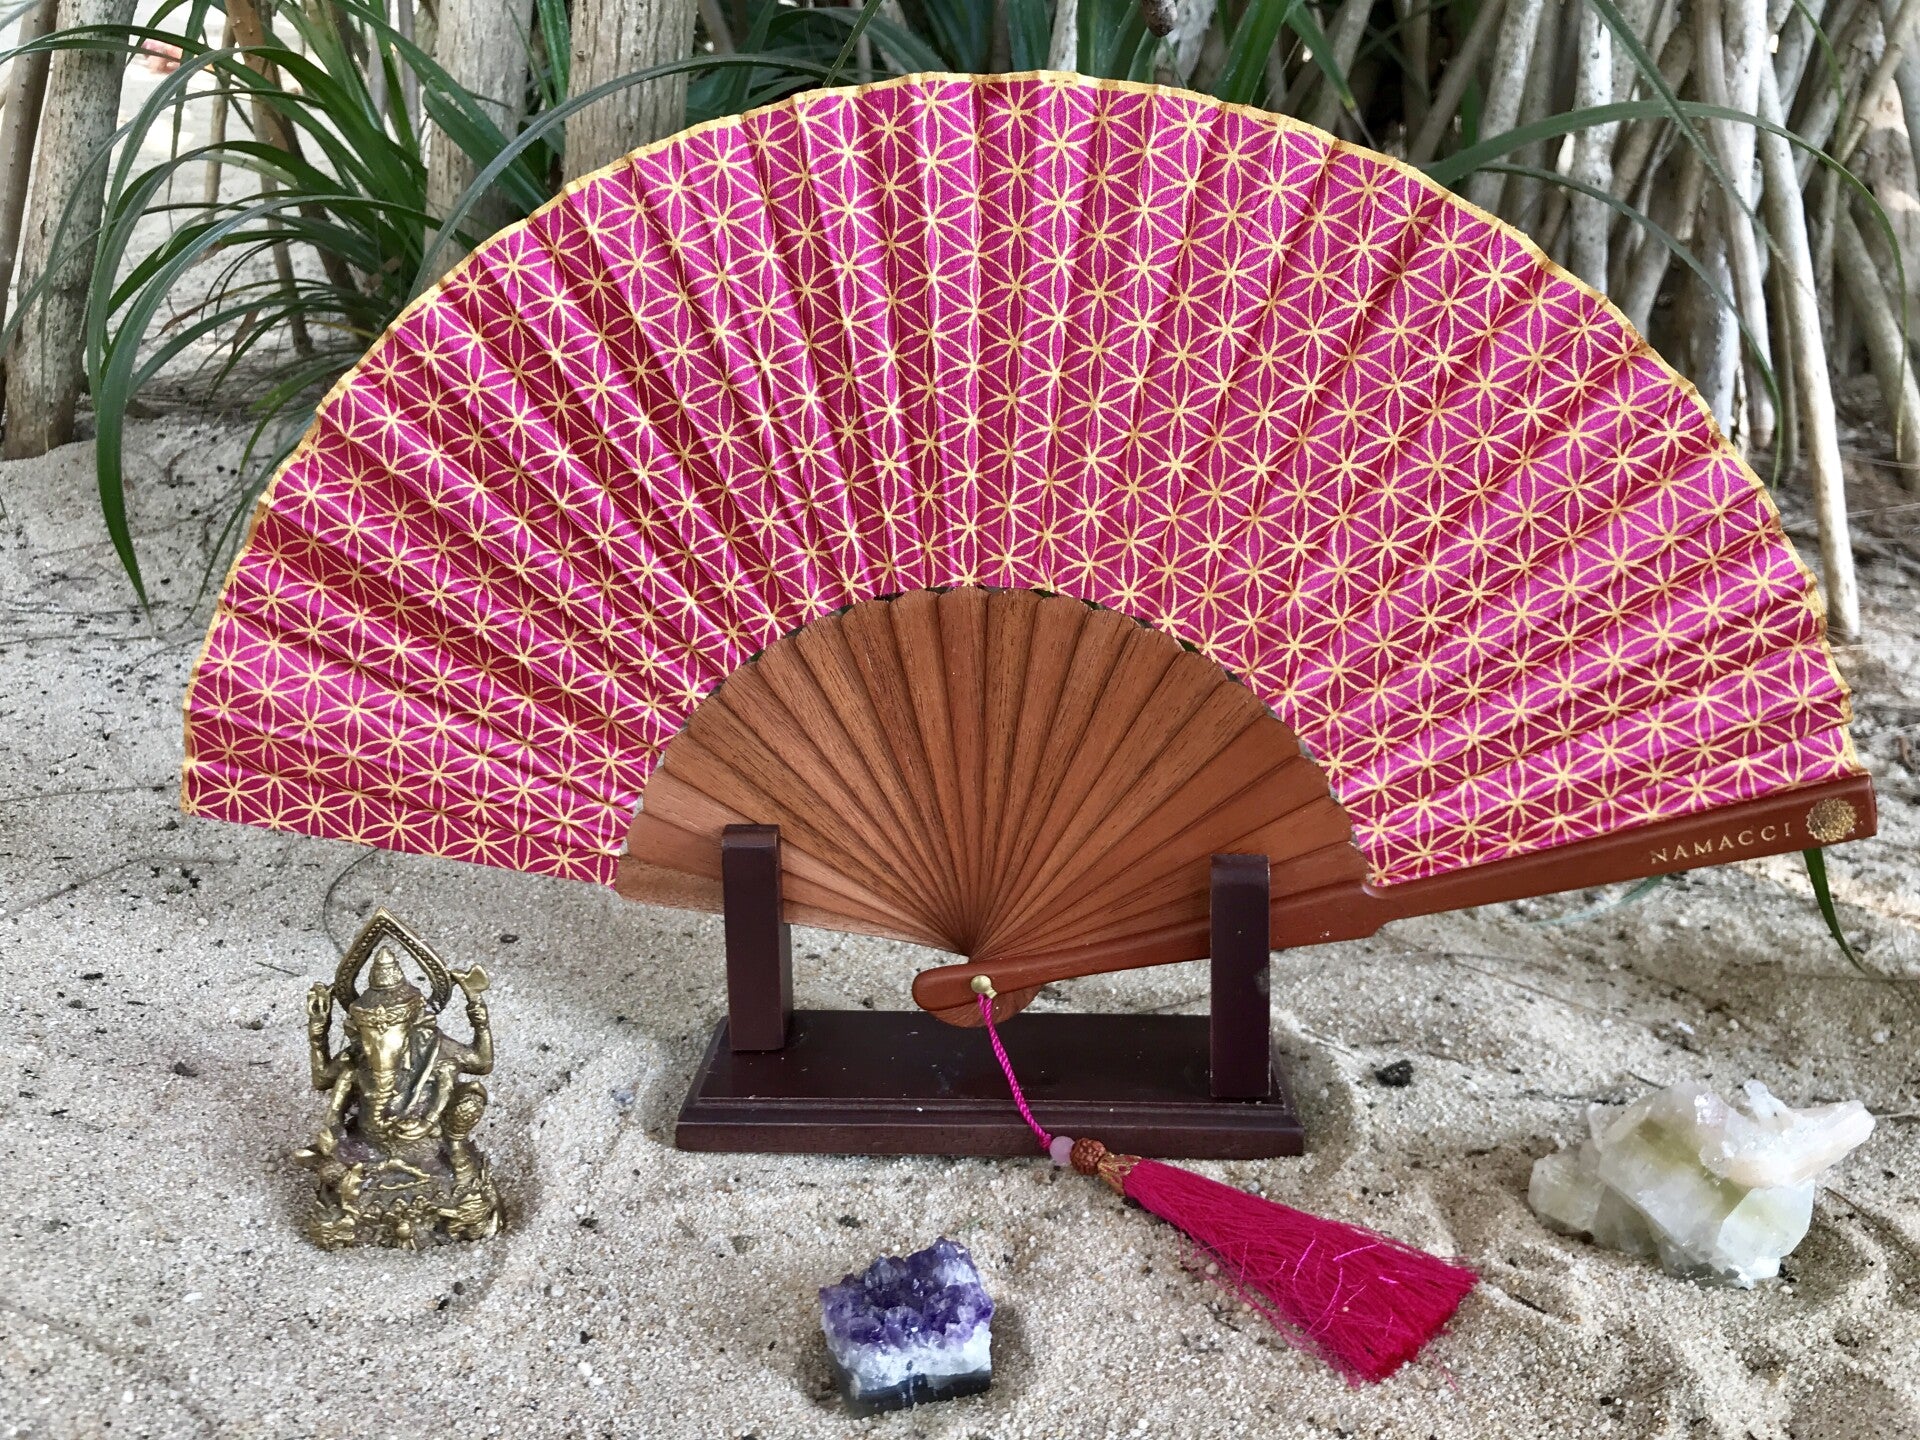 Pink Flower Of Life Sacred Geometry Silk Handfan For Inspiration, Oneness & Creativity